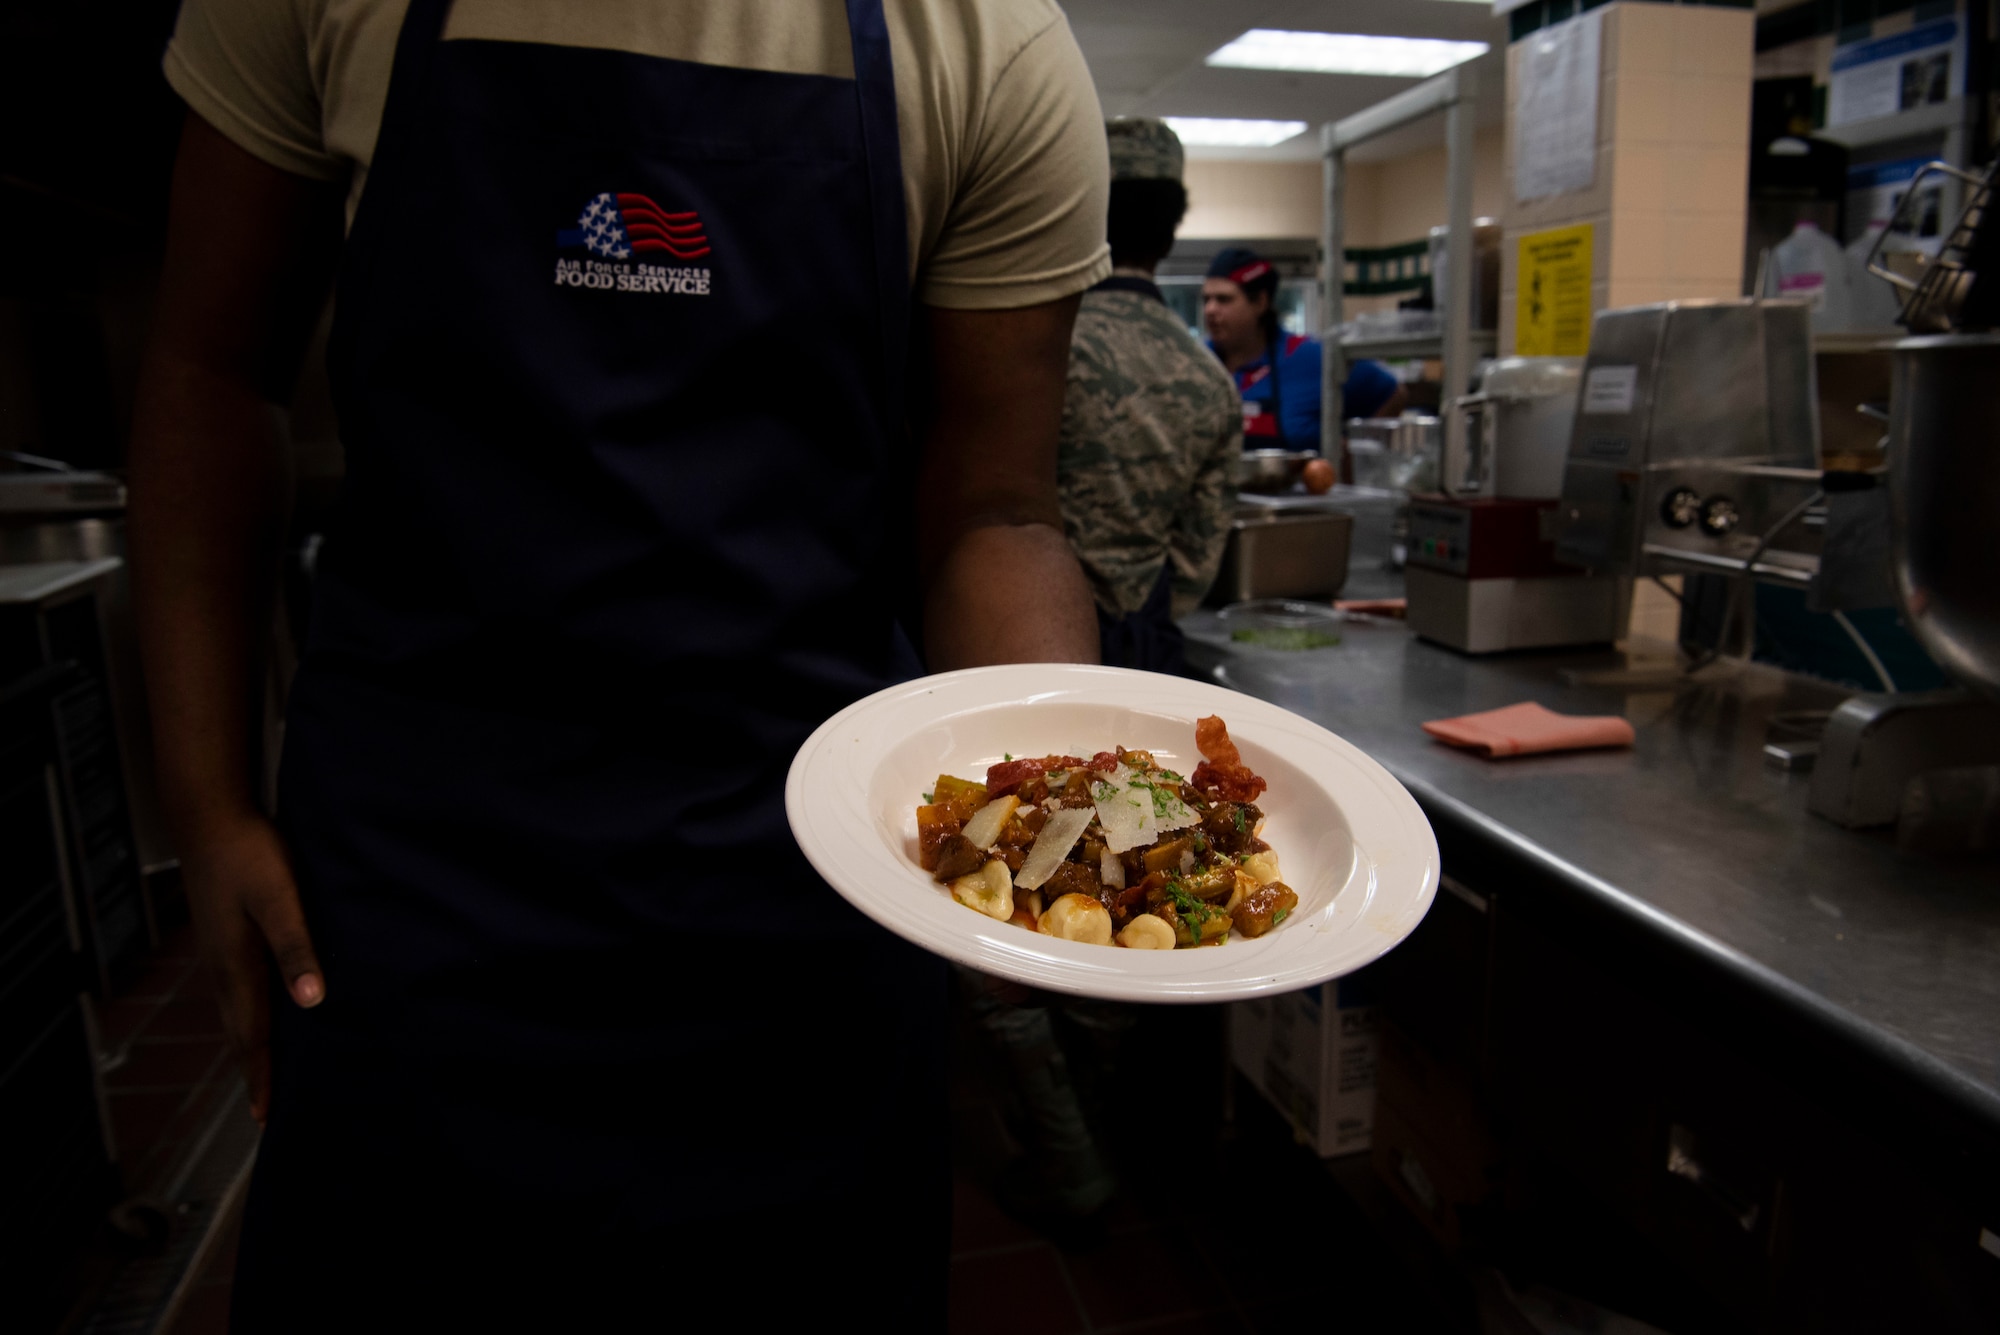 The final dish from Chop It Like It’s Hot is being presented at the end of a cooking competition Oct 15, 2019, at F.E. Warren Air Force Base, Wyo. The team plated pasta with lamb stew, topped with prosciutto. (U.S. Air Force photo by Senior Airman Abbigayle Williams)